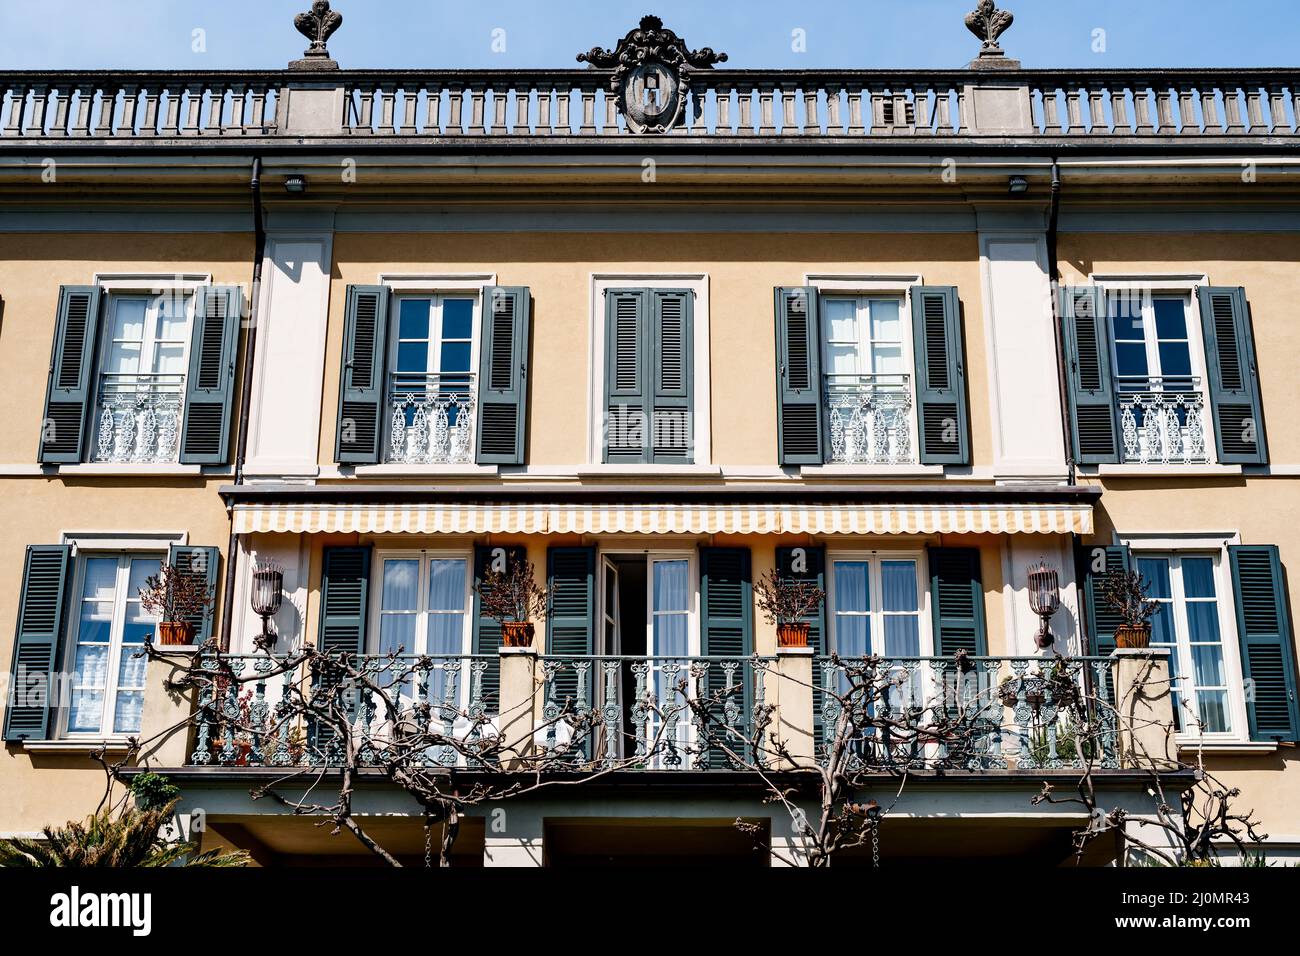 Metal balcony on the facade of the building with shutters on the windows. Como, Italy Stock Photo